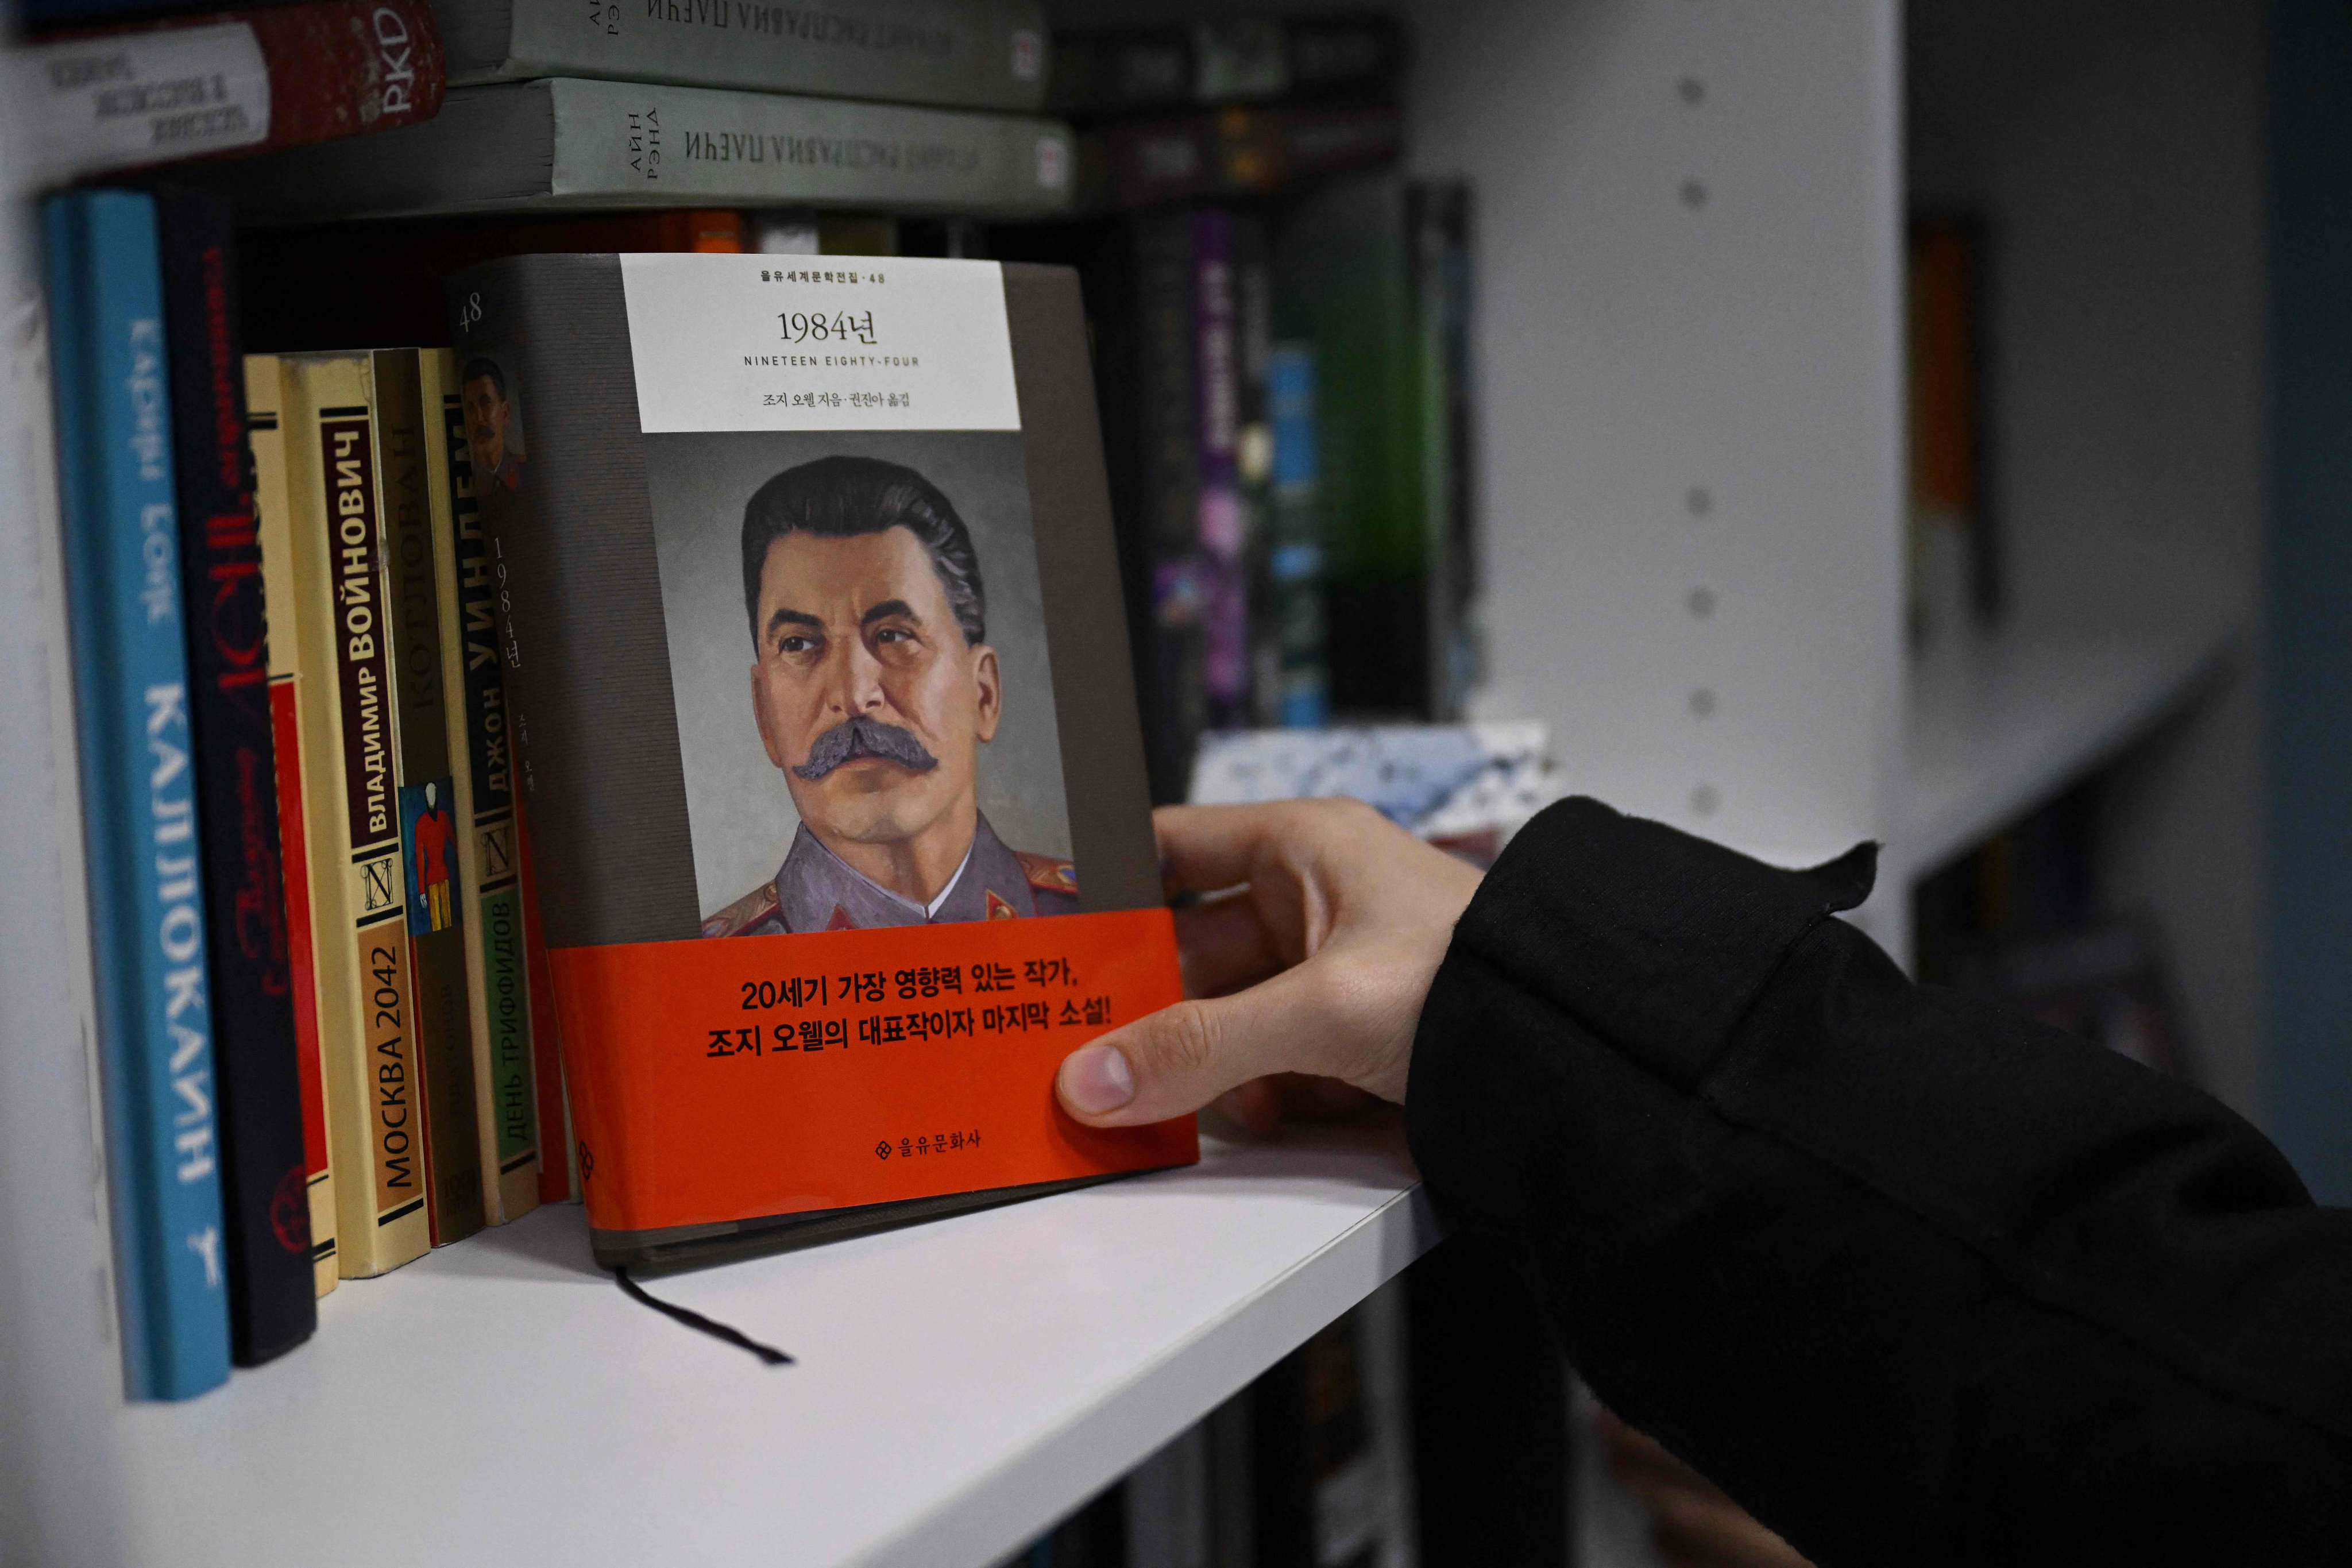 A copy of “1984” in the George Orwell Library, in Russia, which was set up by a Ukraine war opponent to counter  growing propaganda and censorship from the Kremlin. Photo: AFP